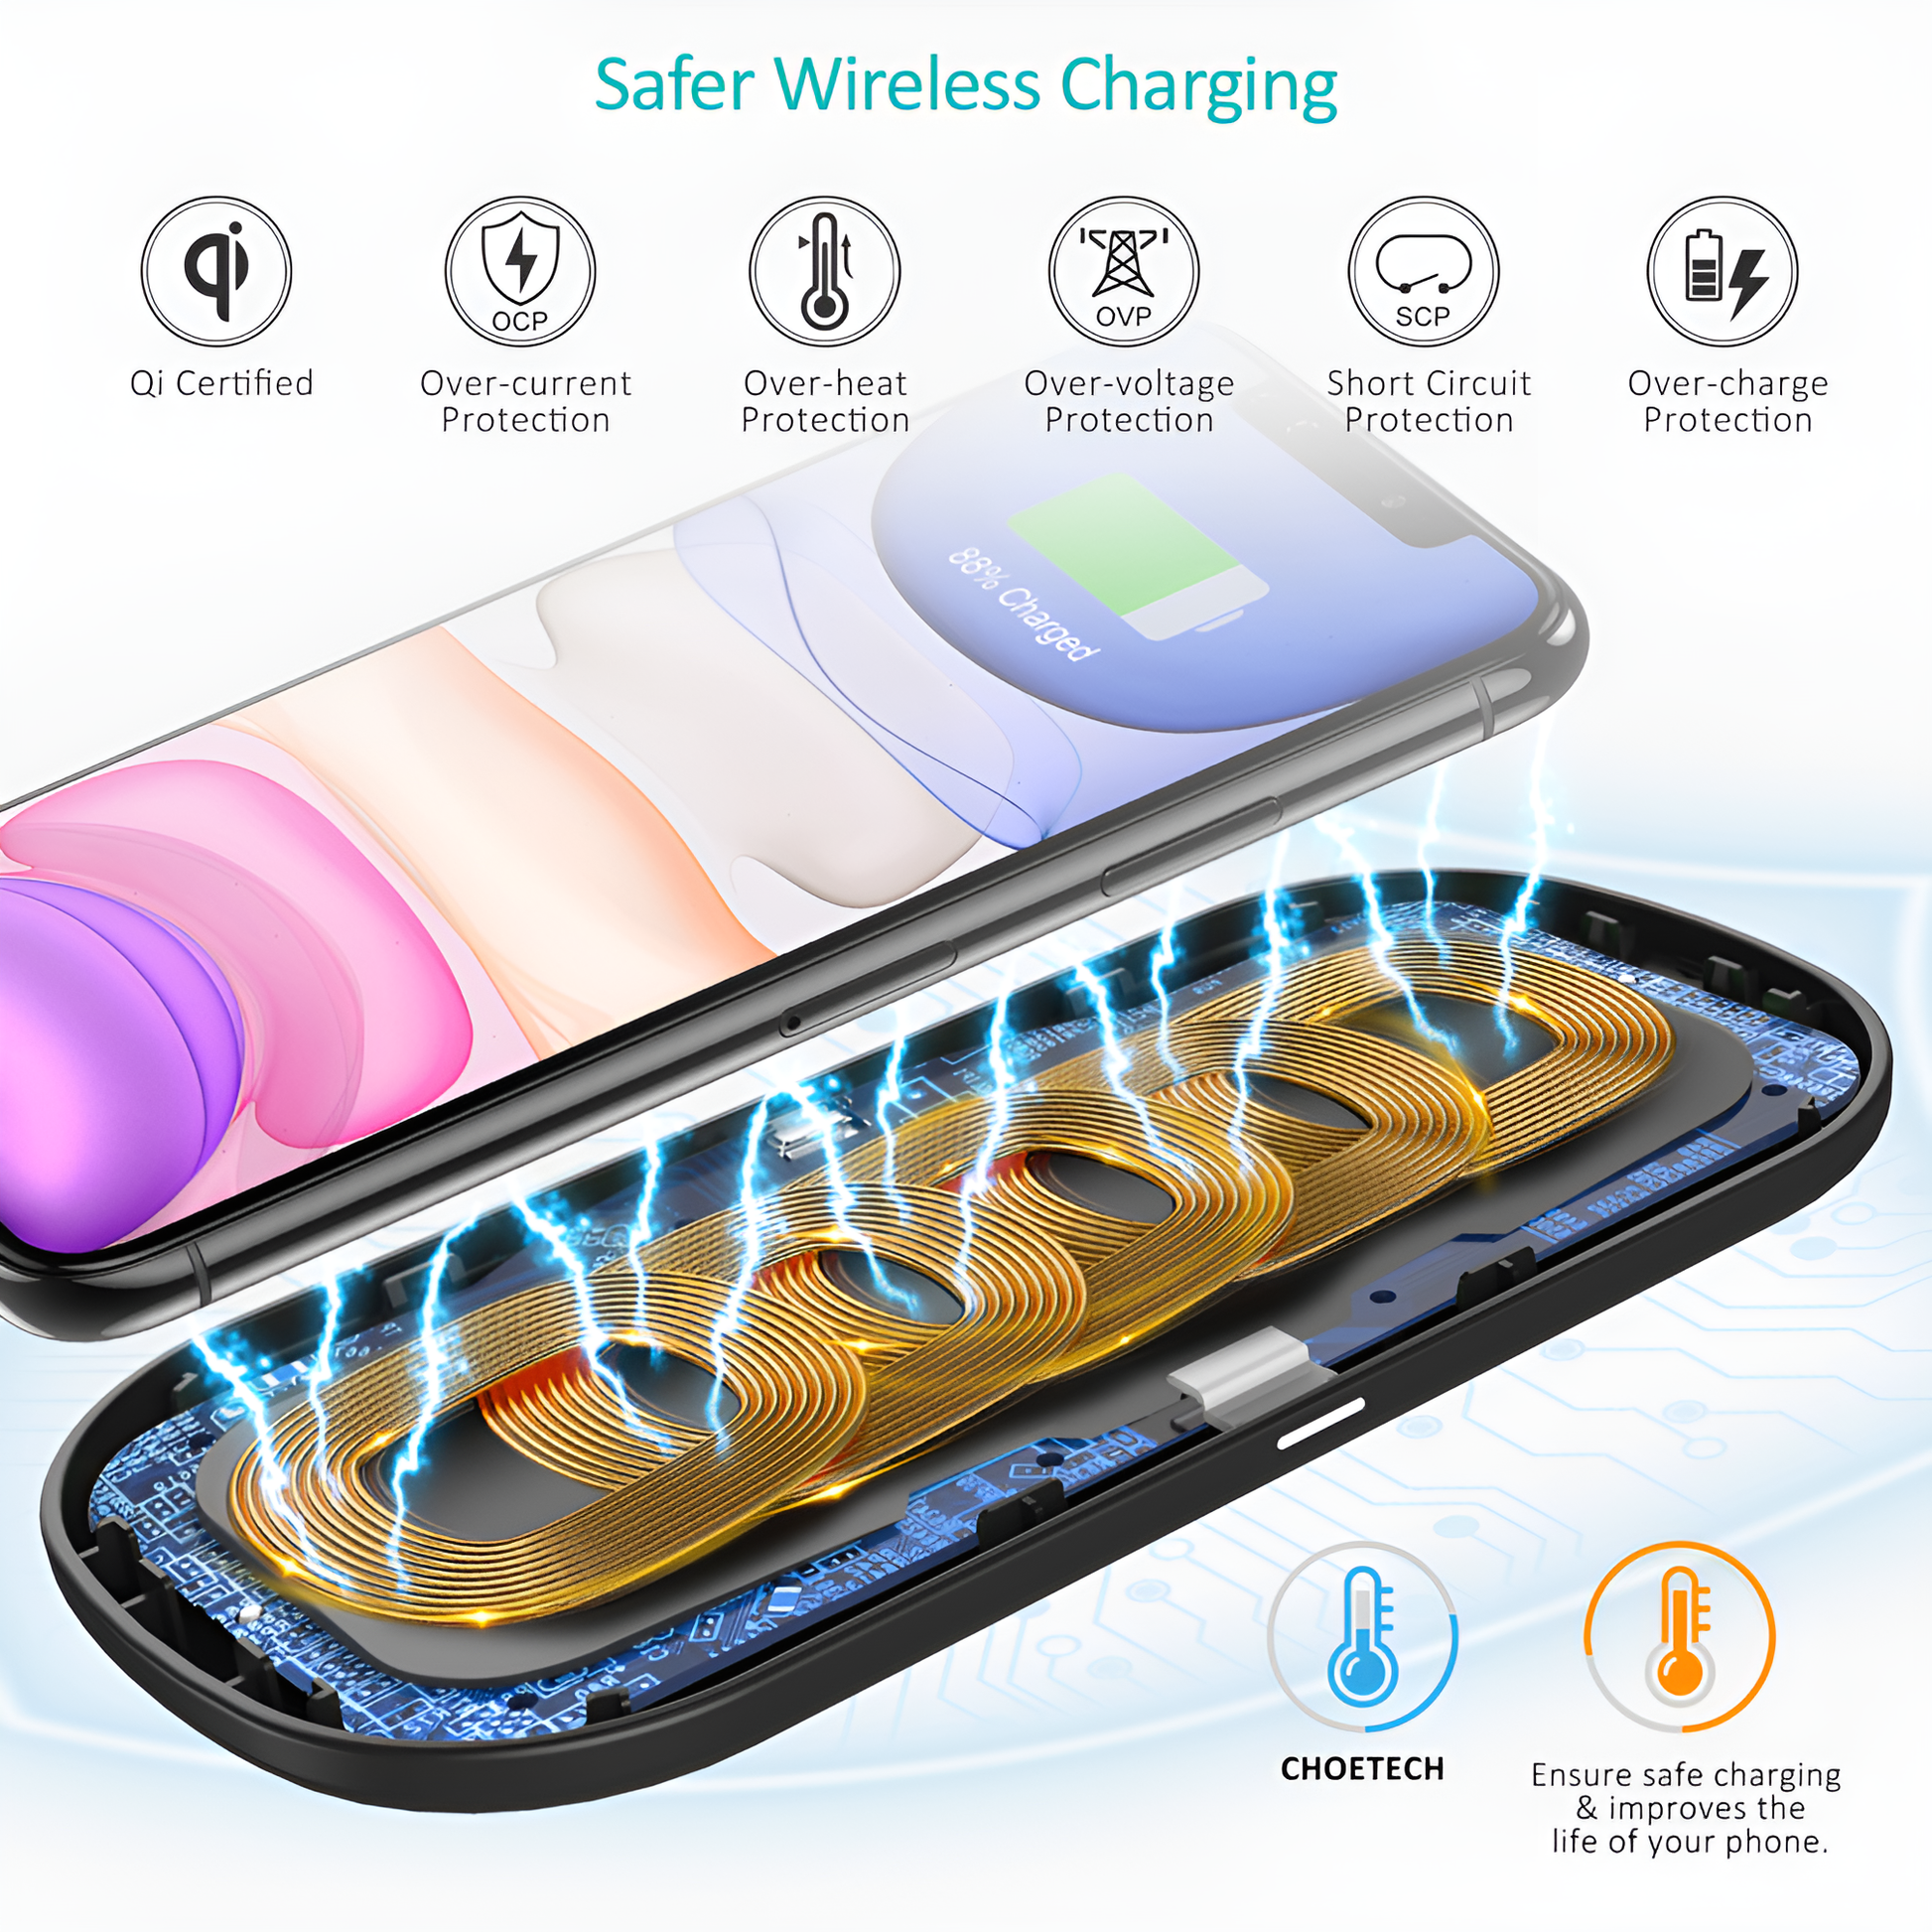 Choetech 5-Coil 15W Dual Fast Wireless Charger for Wireless charging Supported Mobiles, T535-S by  jcbl accessories.Safer Wireless Charging|~~ QiCertified ~~ Overcurrent ~~ Over-heat ~~ Over-voltage Short Circuit ~~ Over-charge | Protection Protection Protection Protection Protection | Ensure safe charging : ~ &improves the | life of your phone.